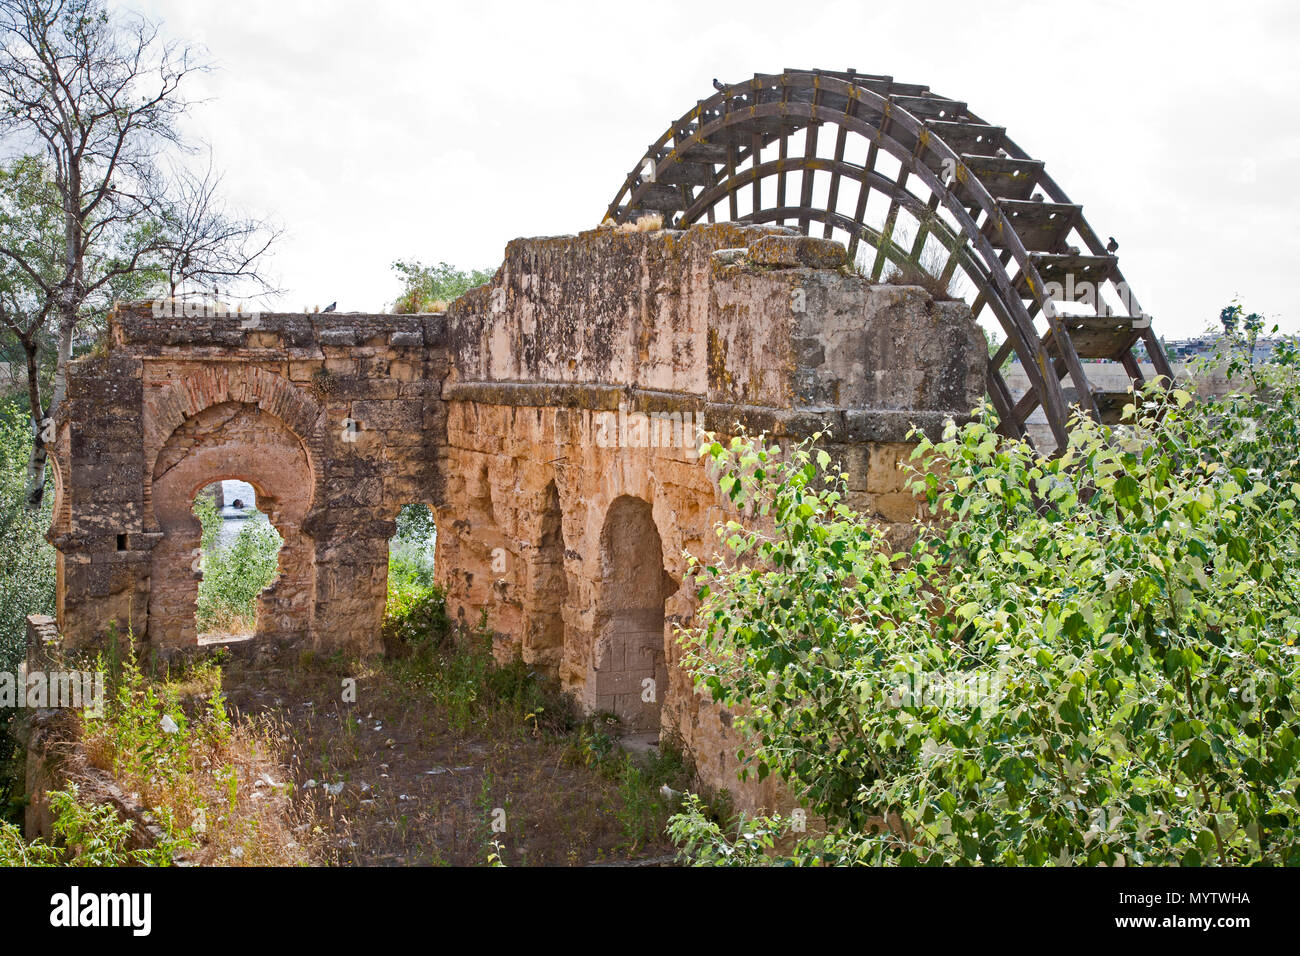 May 28, 2016- Cordoba, Spain- the roman architecture of a round water wheel has been abandoned Stock Photo